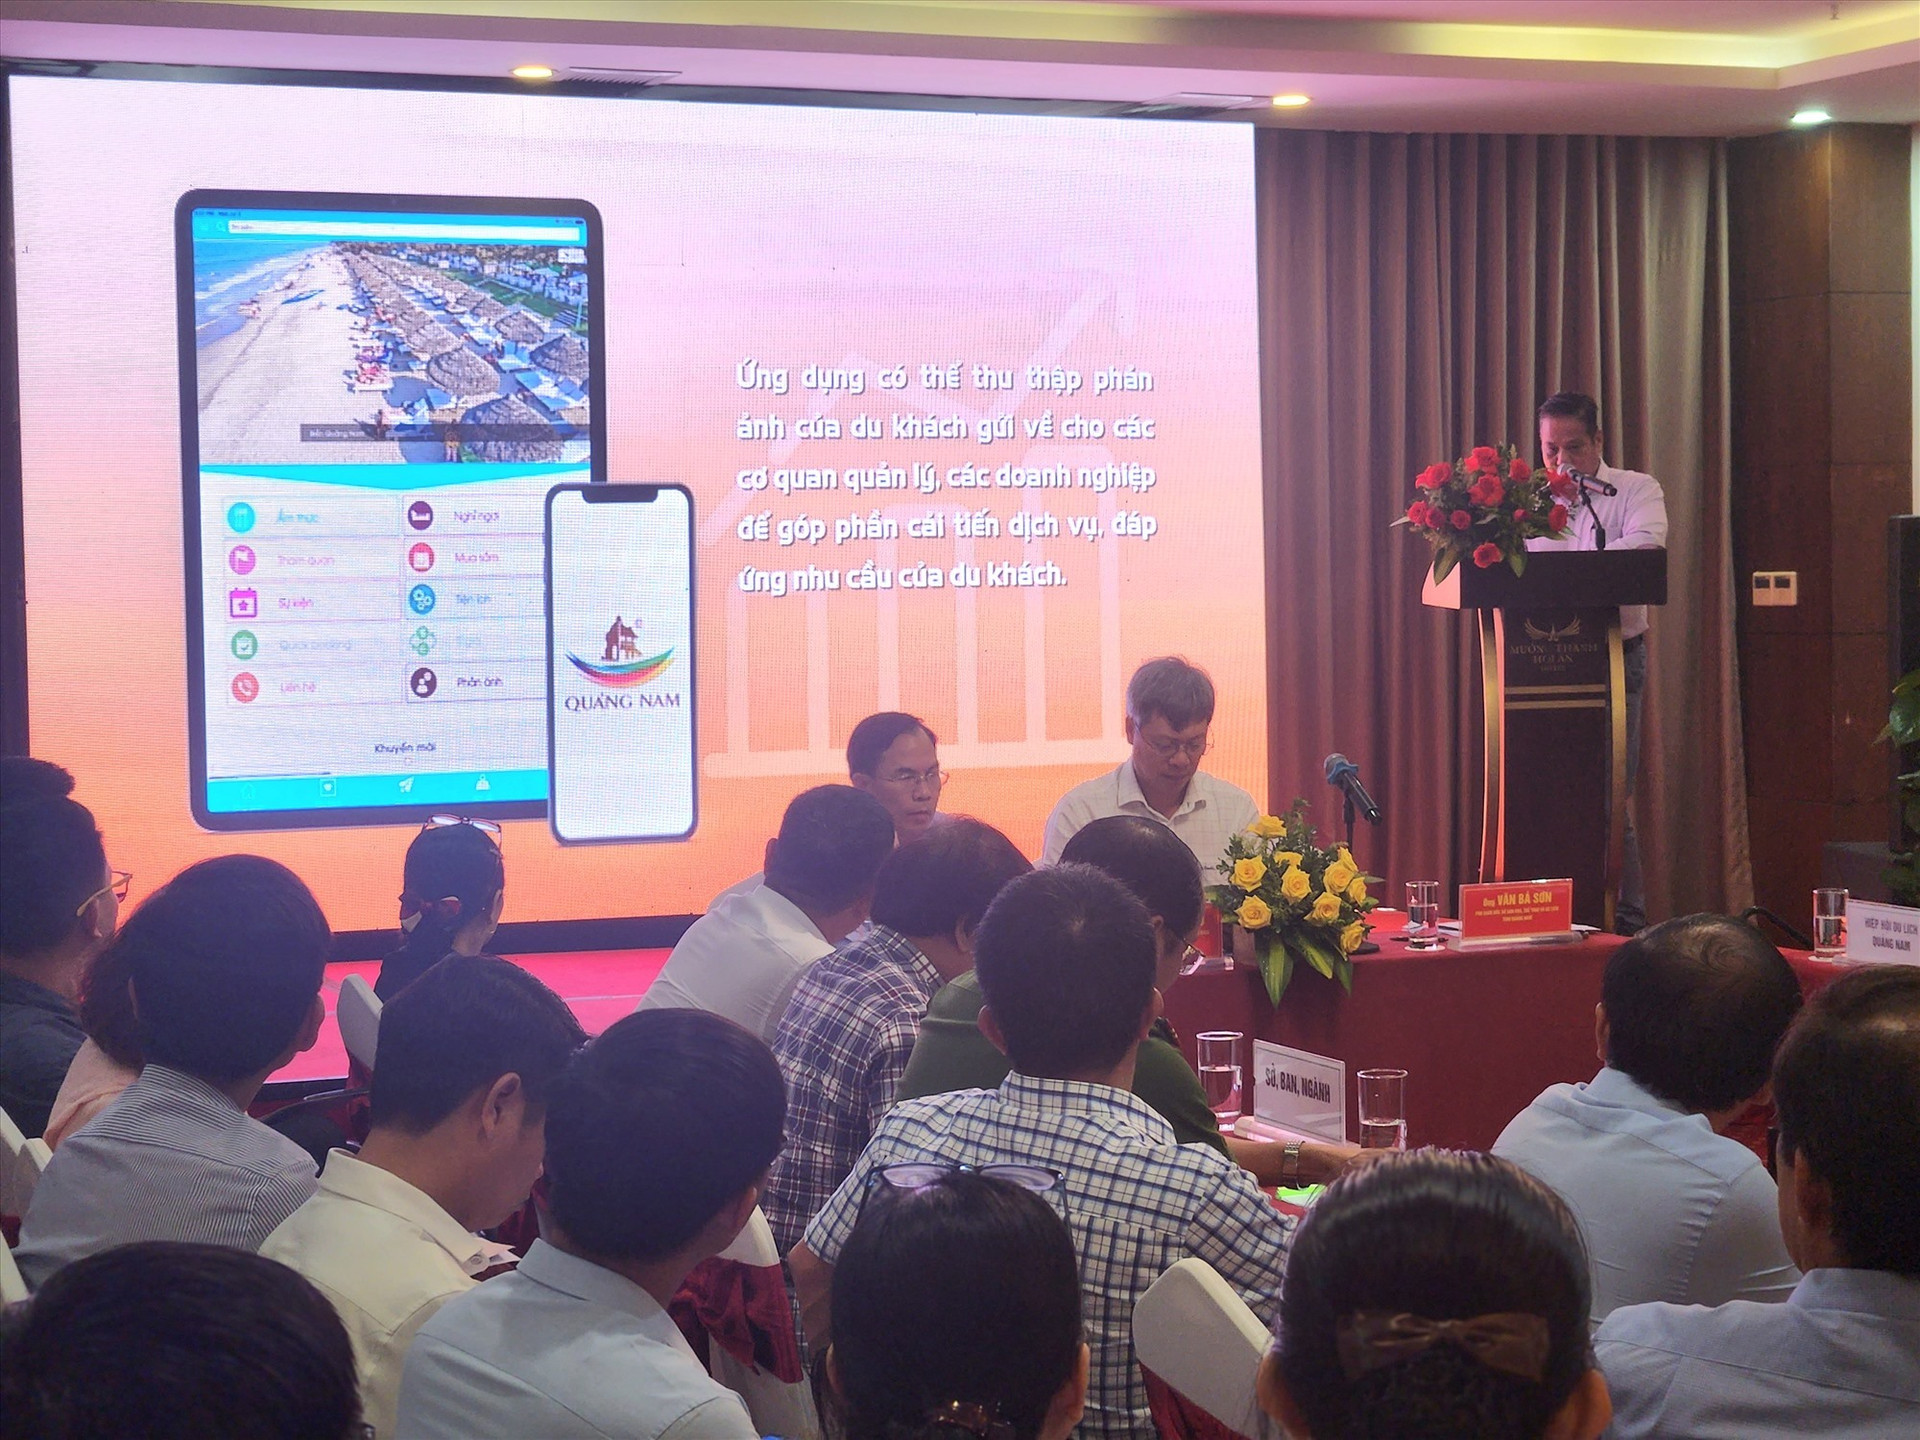 Some Quang Nam’s smart tourism apps are introduced at the seminar.